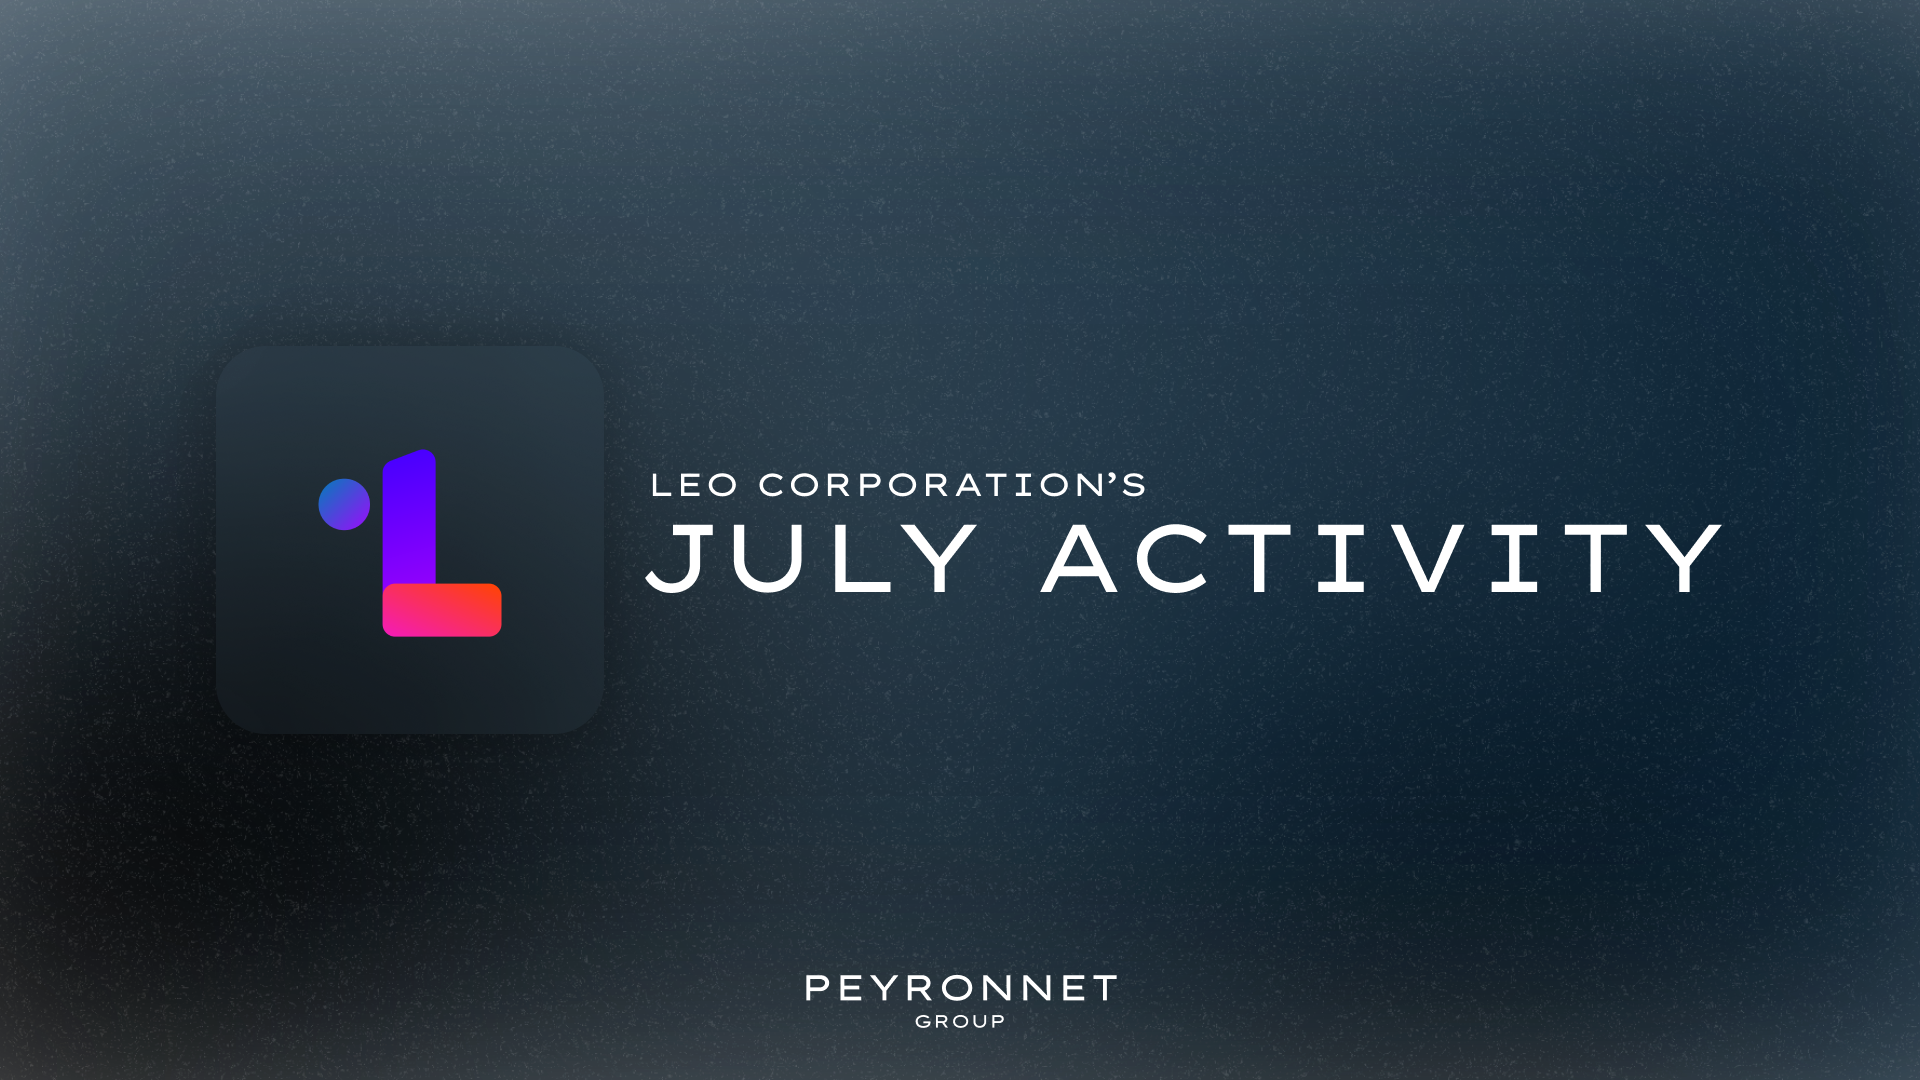 Peyronnet Group's Subsidiary, Léo Corporation, Sets New Records with a Productive July